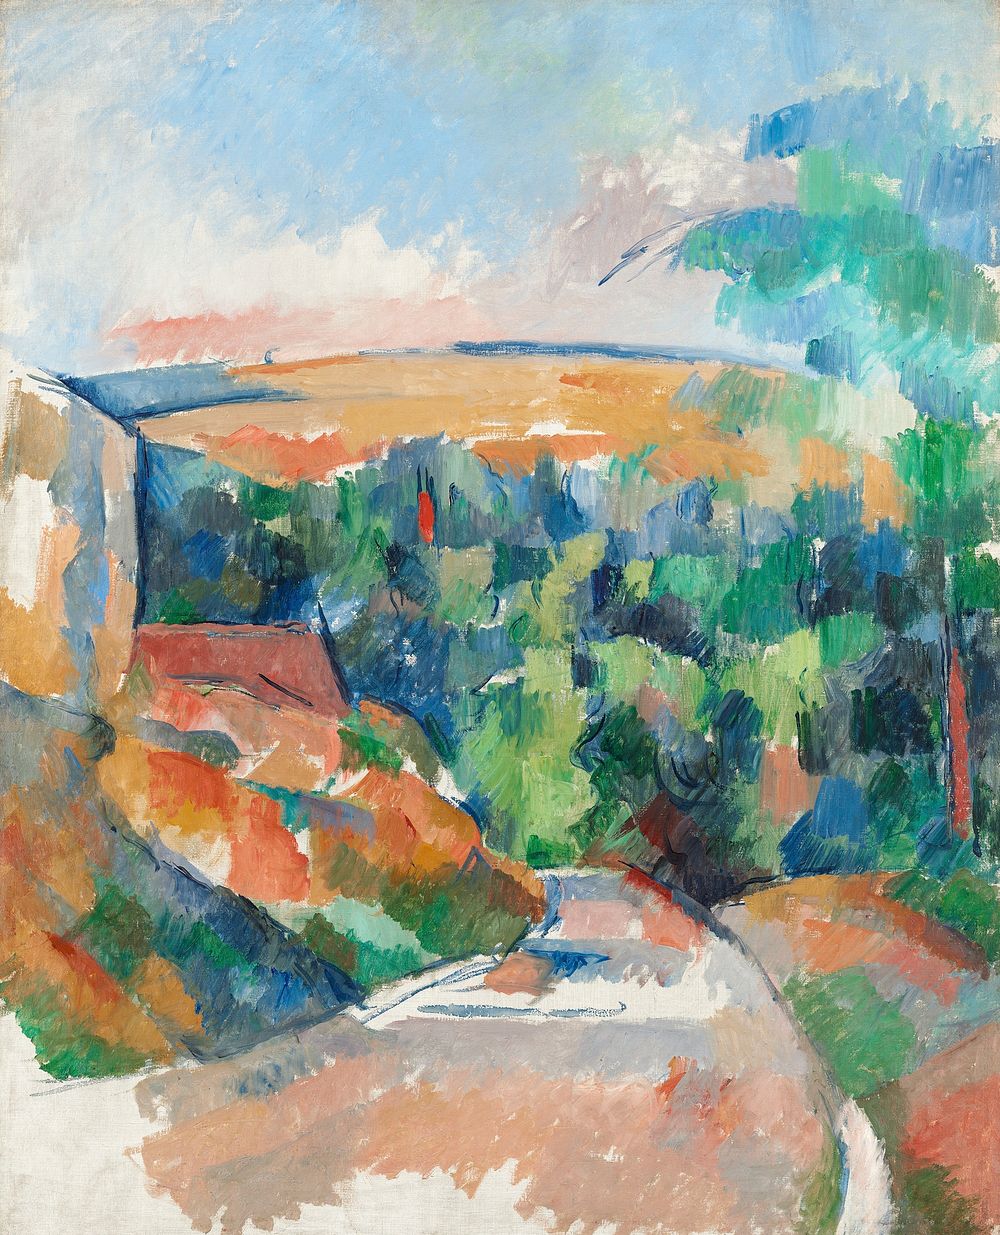 The Bend in the Road (ca. 1900&ndash;1906) by Paul C&eacute;zanne. Original from The National Gallery of Art. Digitally…